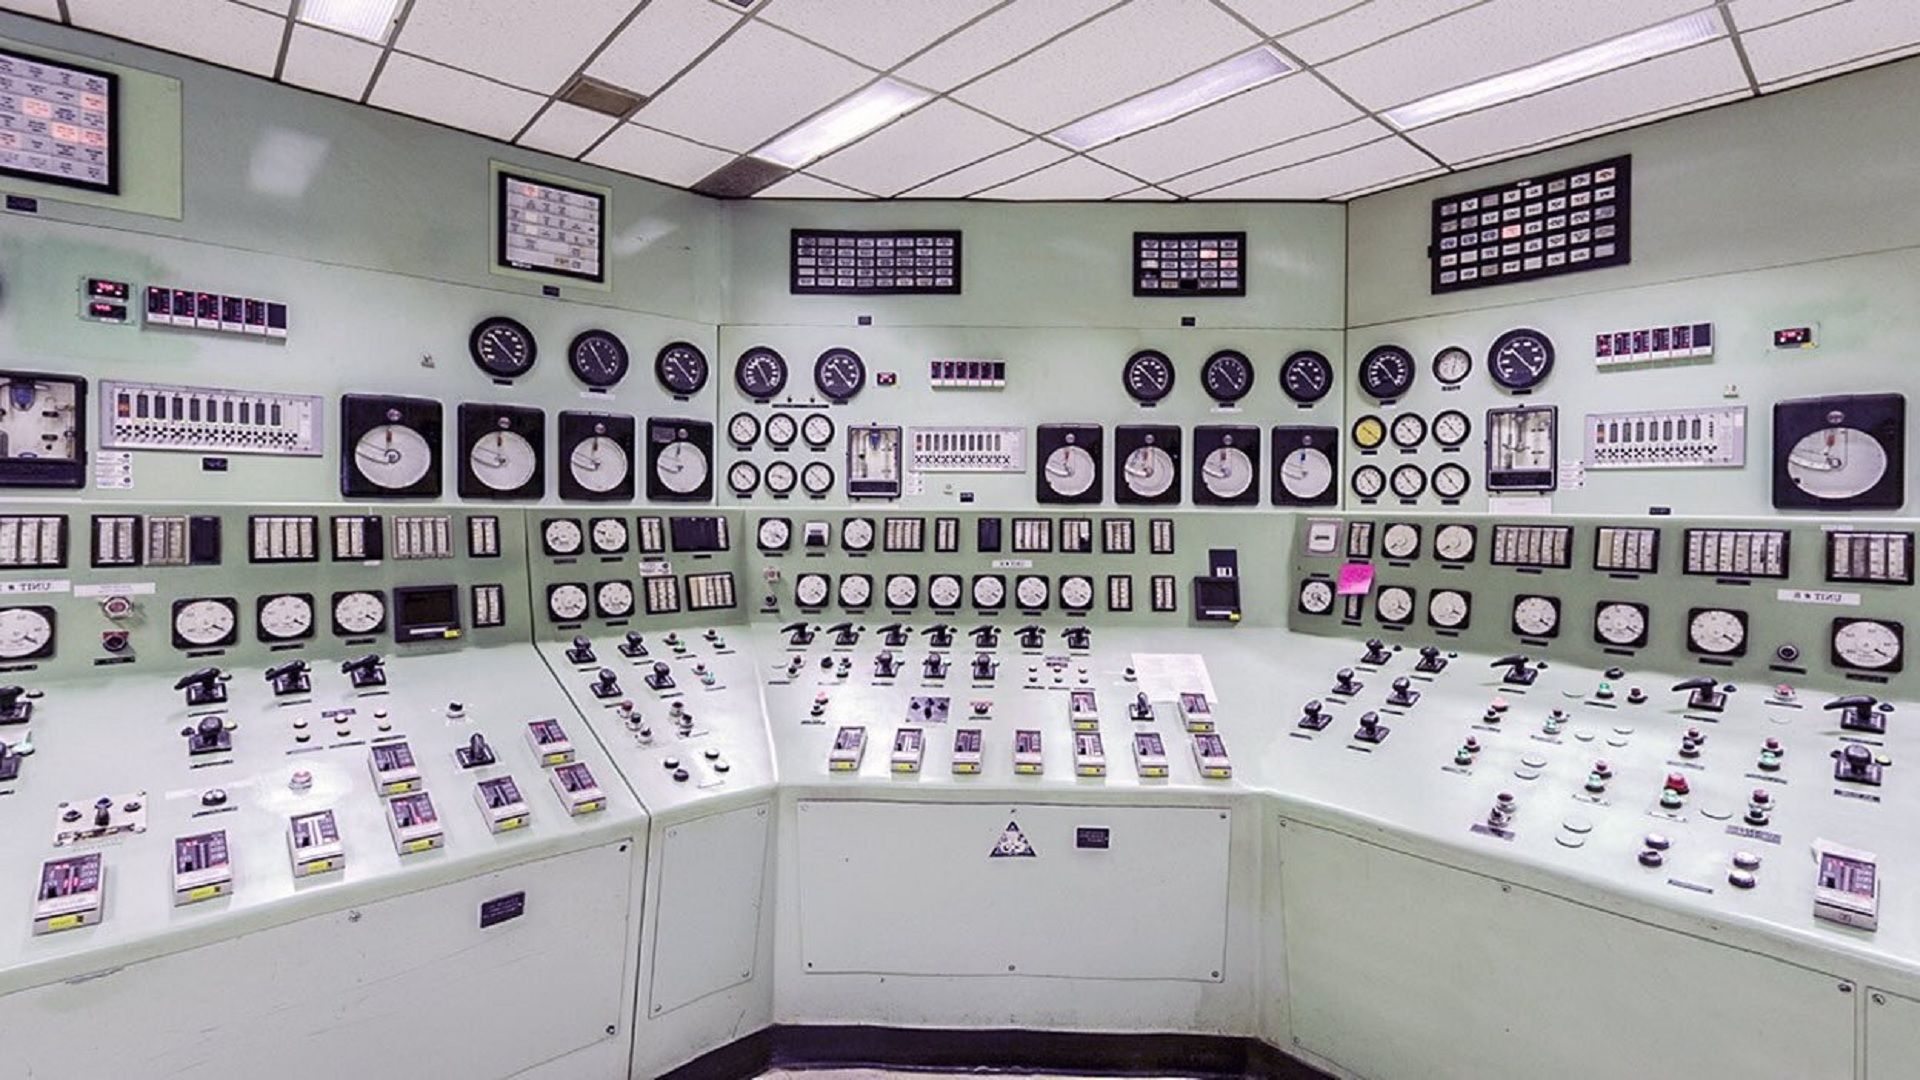 Satisfying Photos Of Classic Control Rooms That Once Ran The World image 9